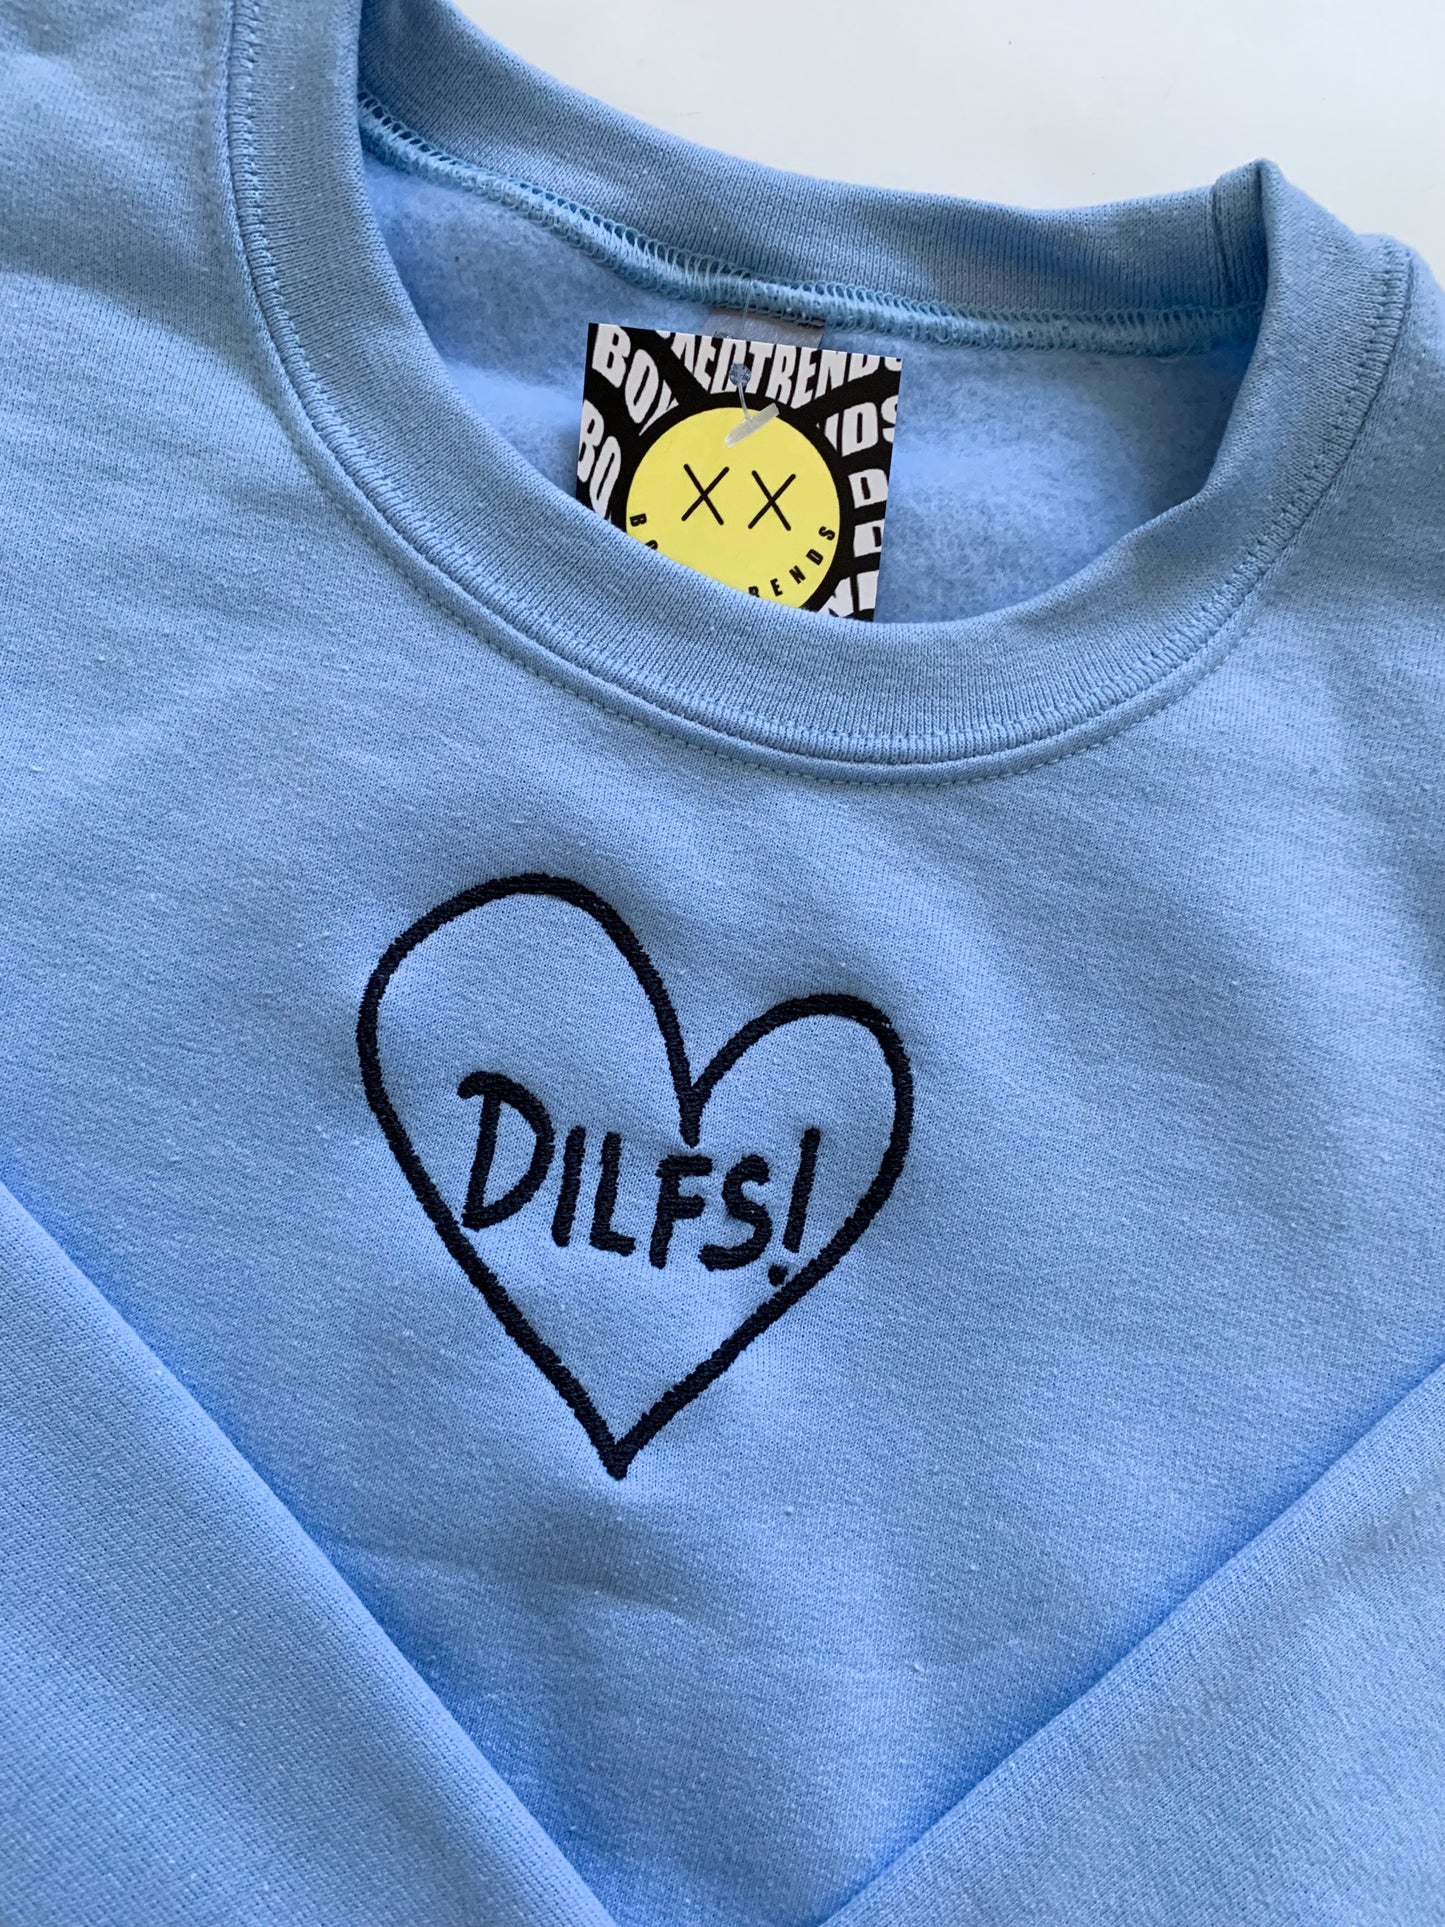 Milfs and Dilfs Embroidered Matching Set